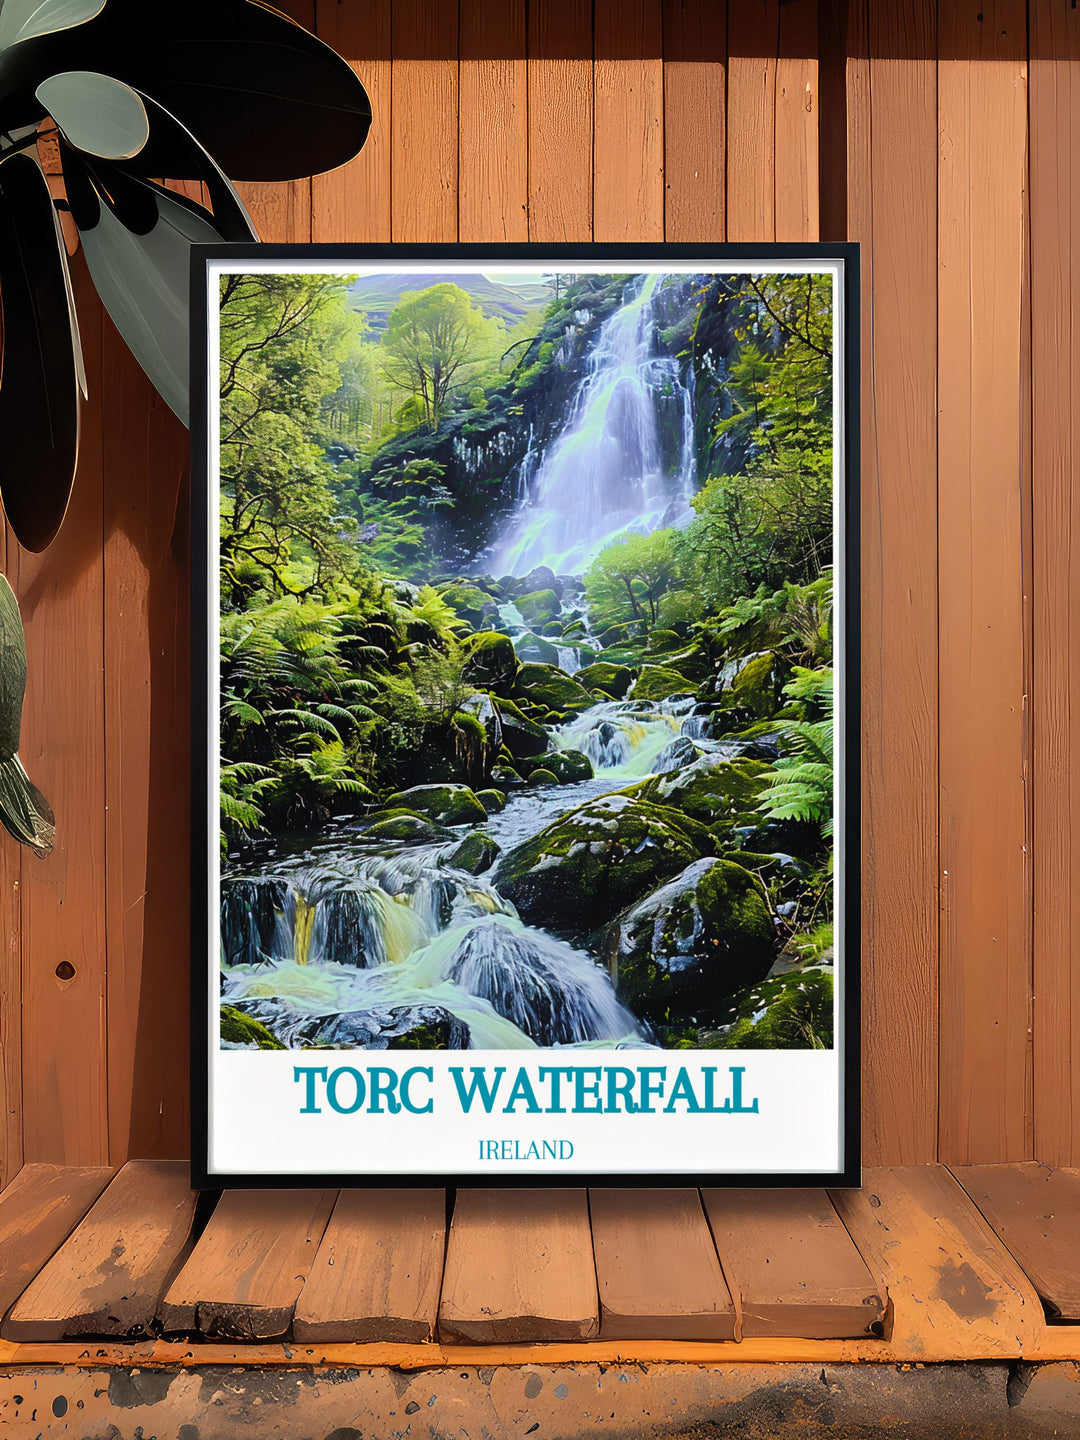 Explore the rich history and legends surrounding Torc Waterfall with this beautifully illustrated art print, ideal for any art collection.